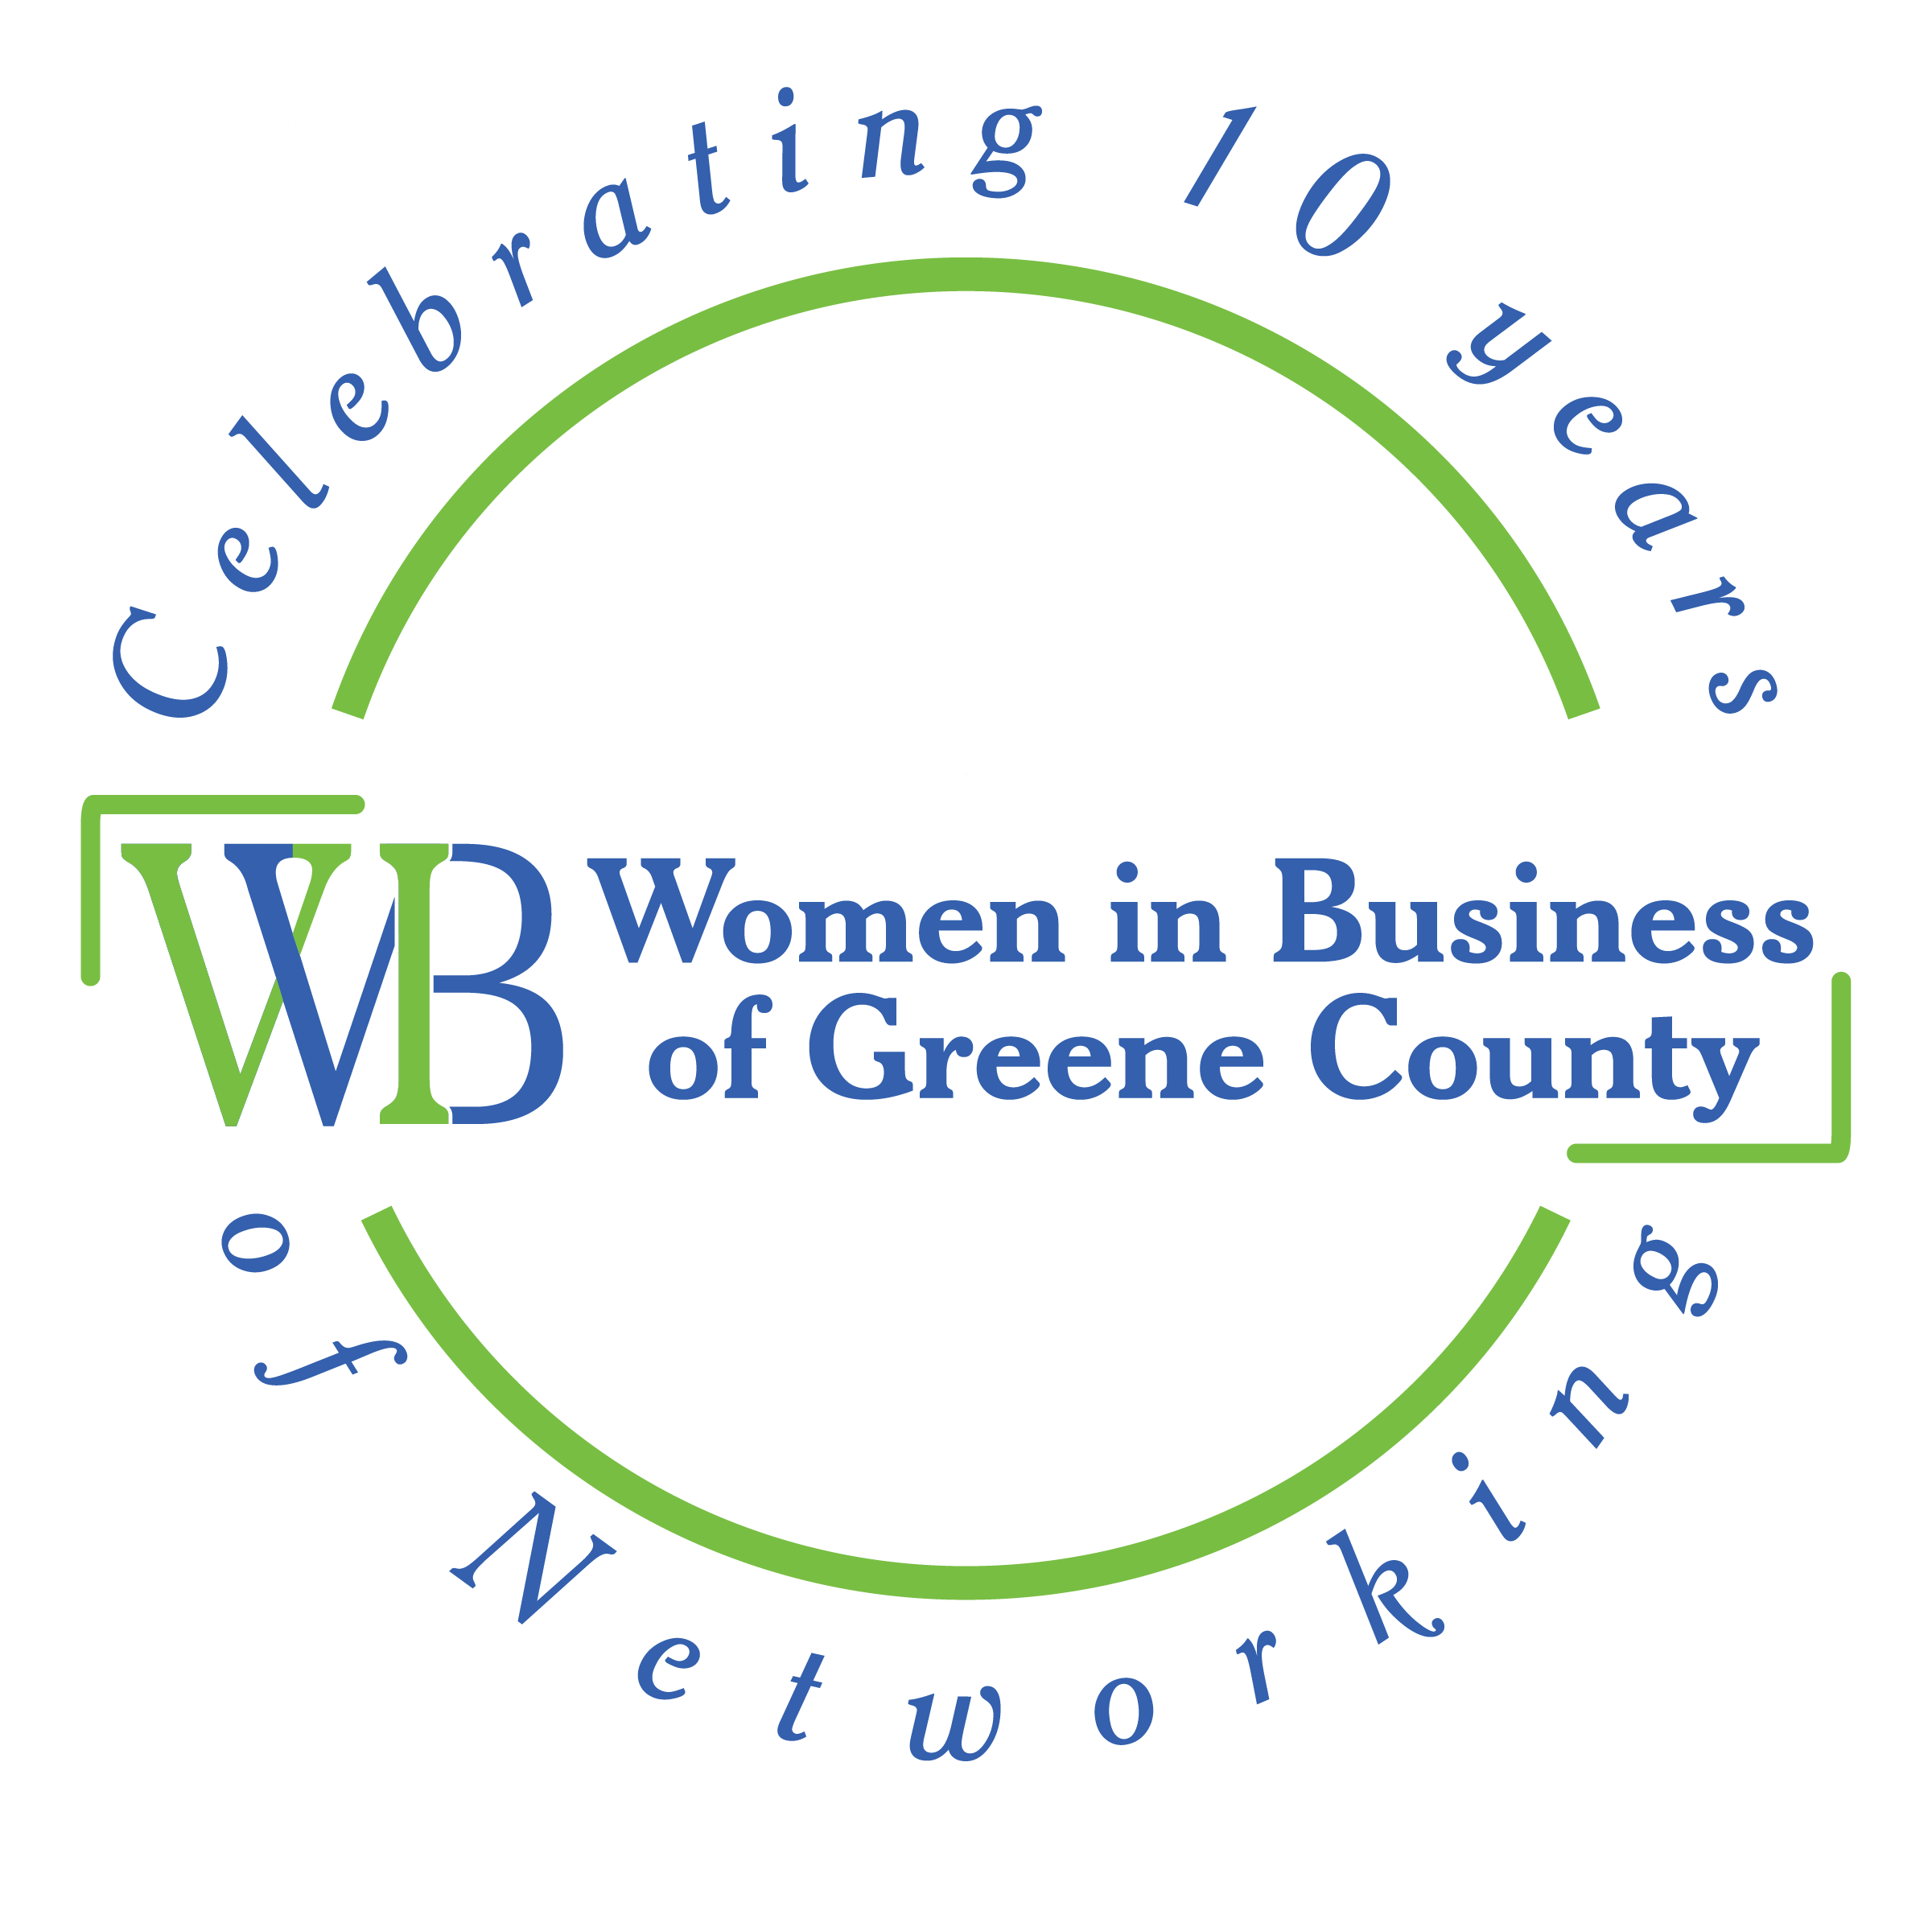 Cynthia Stemple to Speak at Women In Business on March 17, 2022